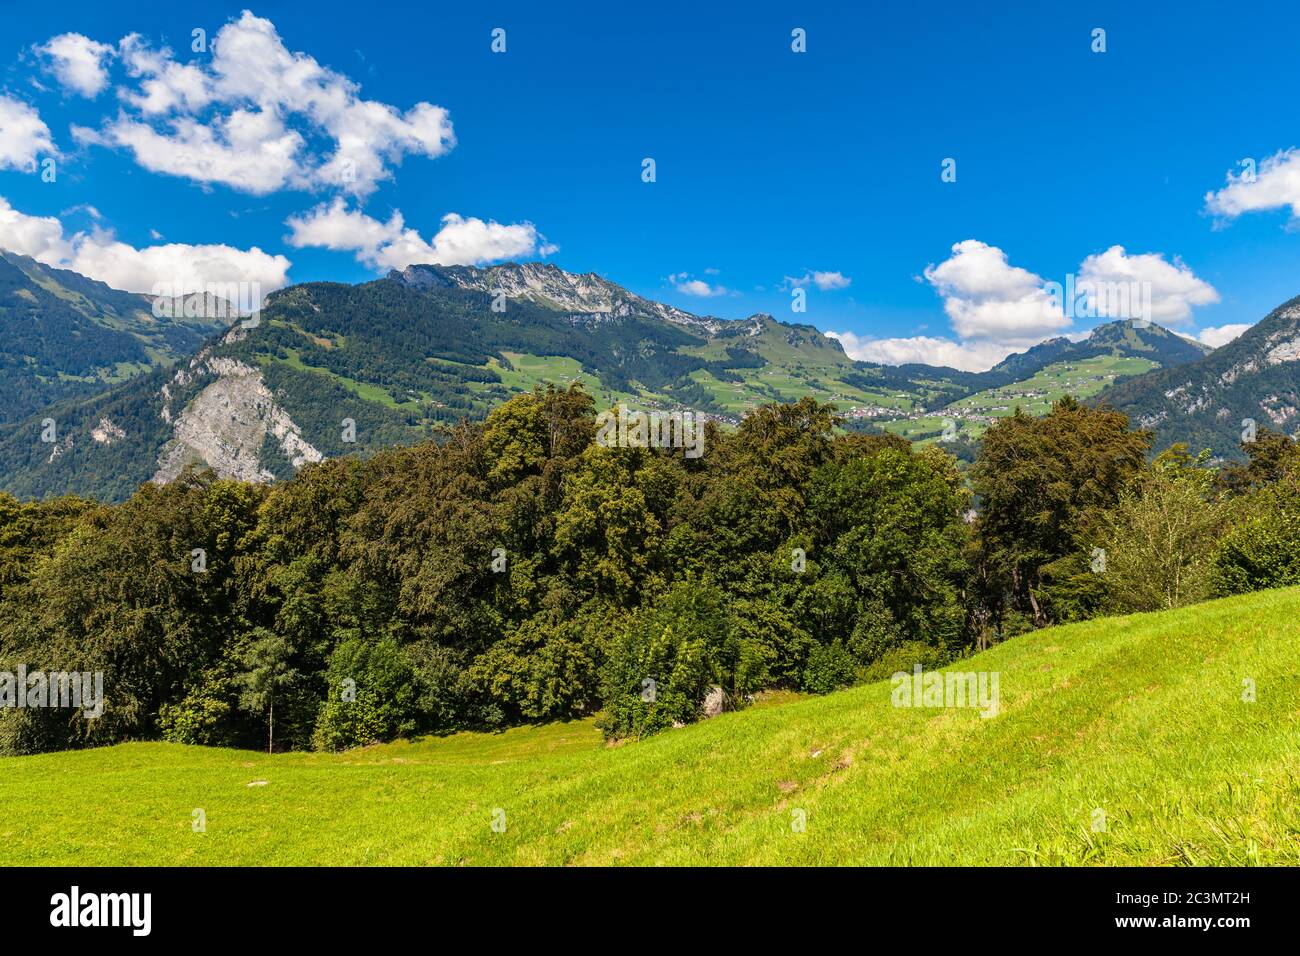 Idyllic view of Countryside in Switzerland with houses, mountain, meadow, near the Walensee lake, Canton of Glarus. lake, Canton of Glarus. Stock Photo